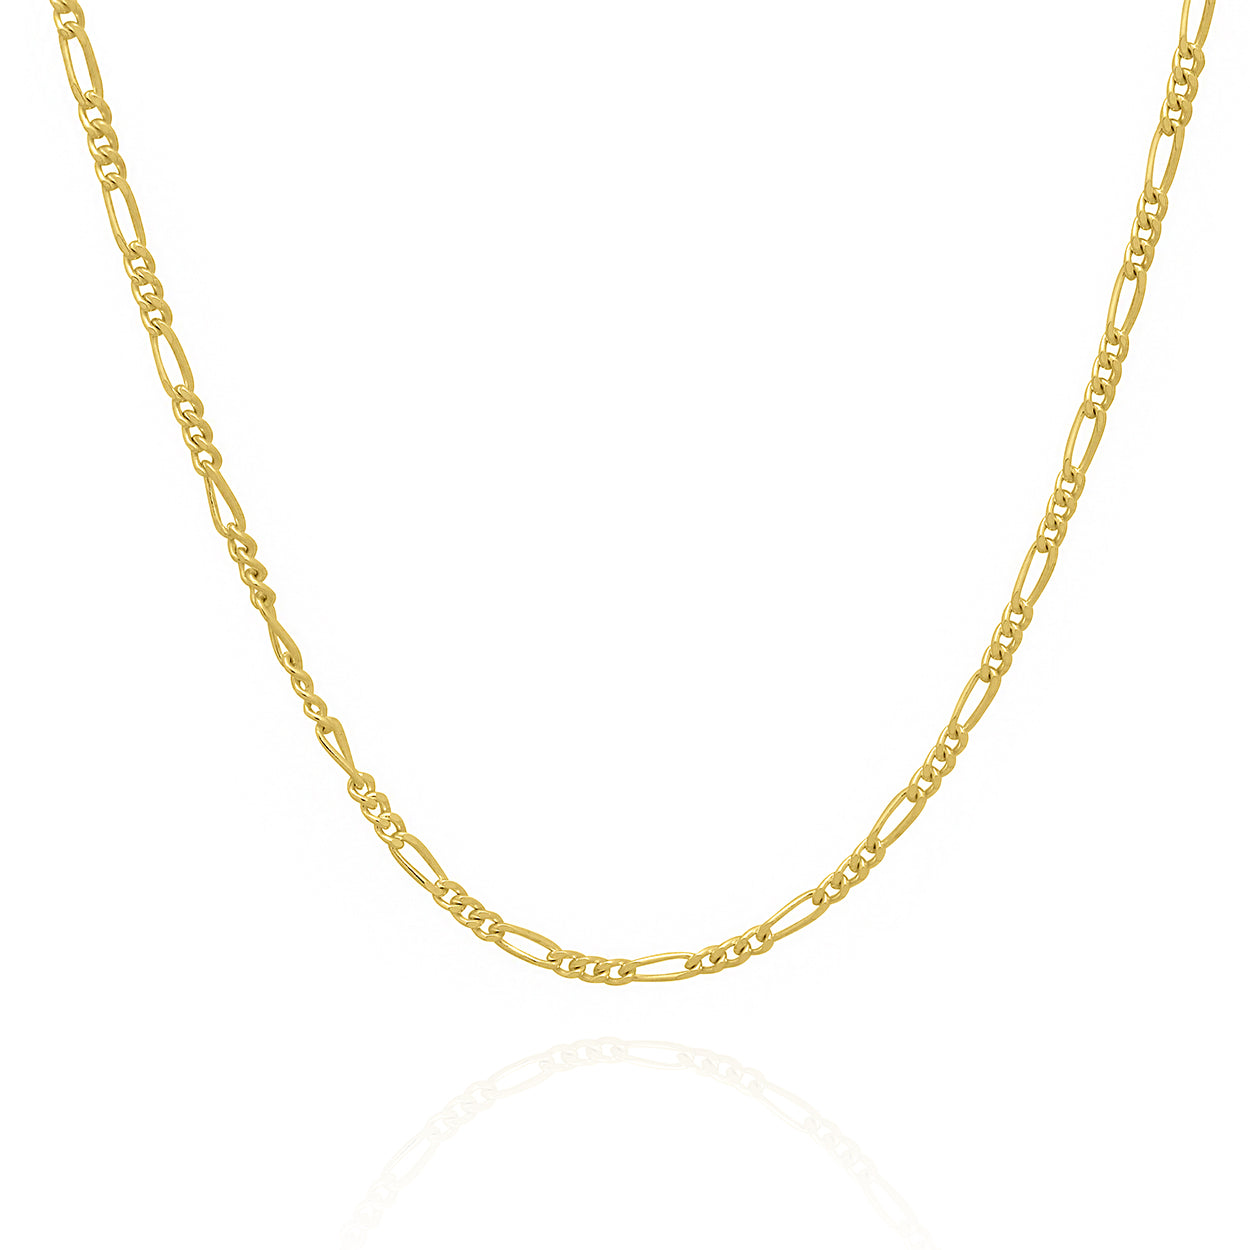 2.4mm Wide Figaro Style Chain Solid Gold Yellow